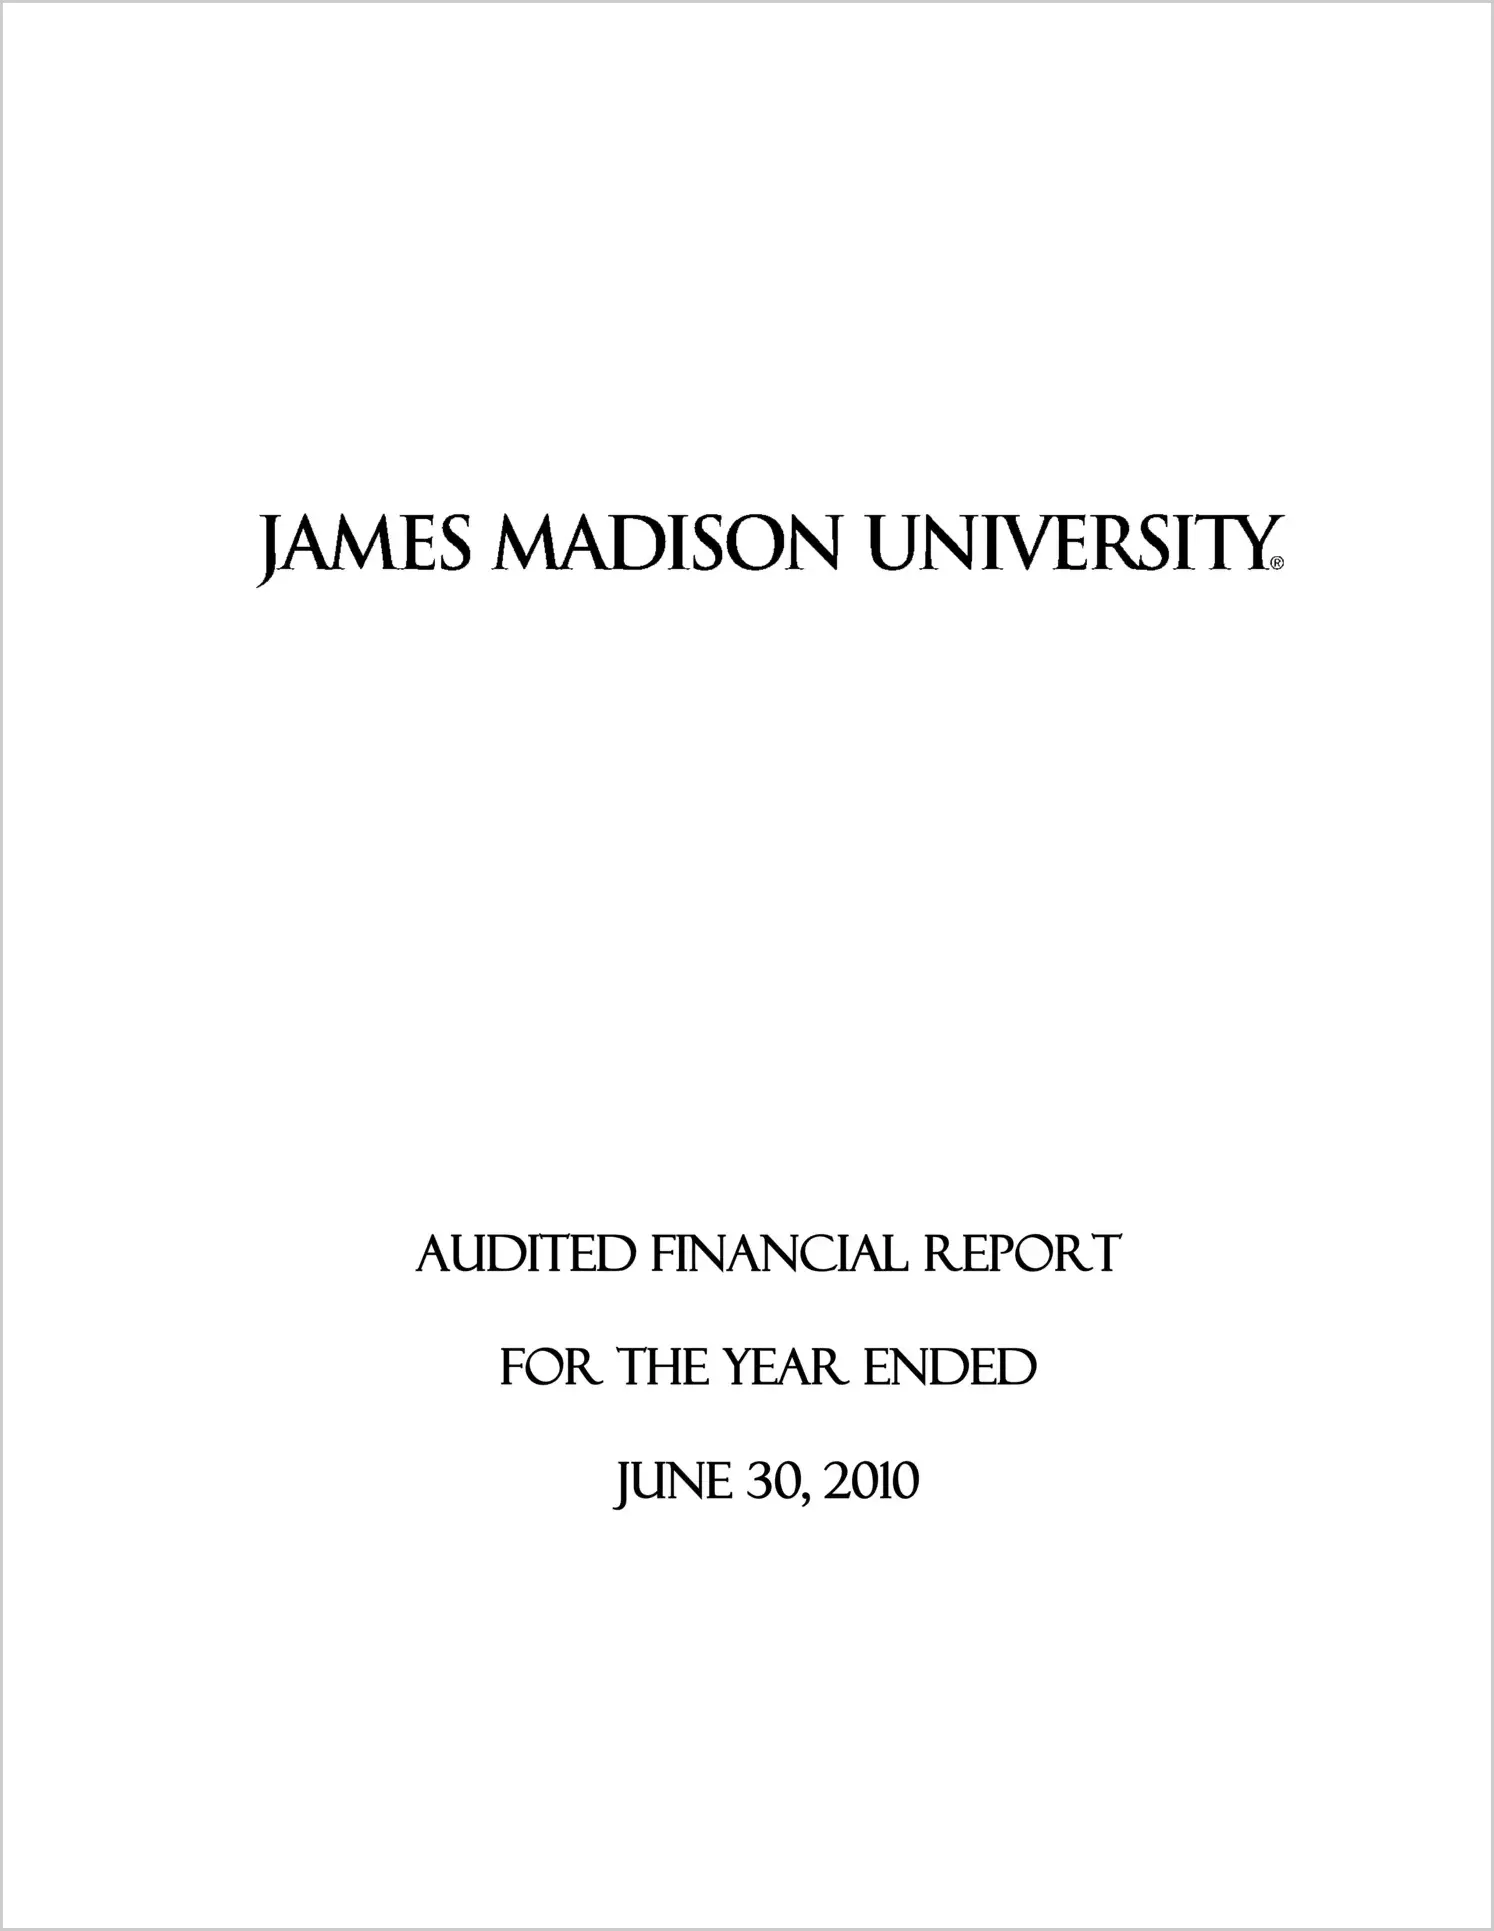 James Madison University Financial Statements for the year ended June 30, 2010